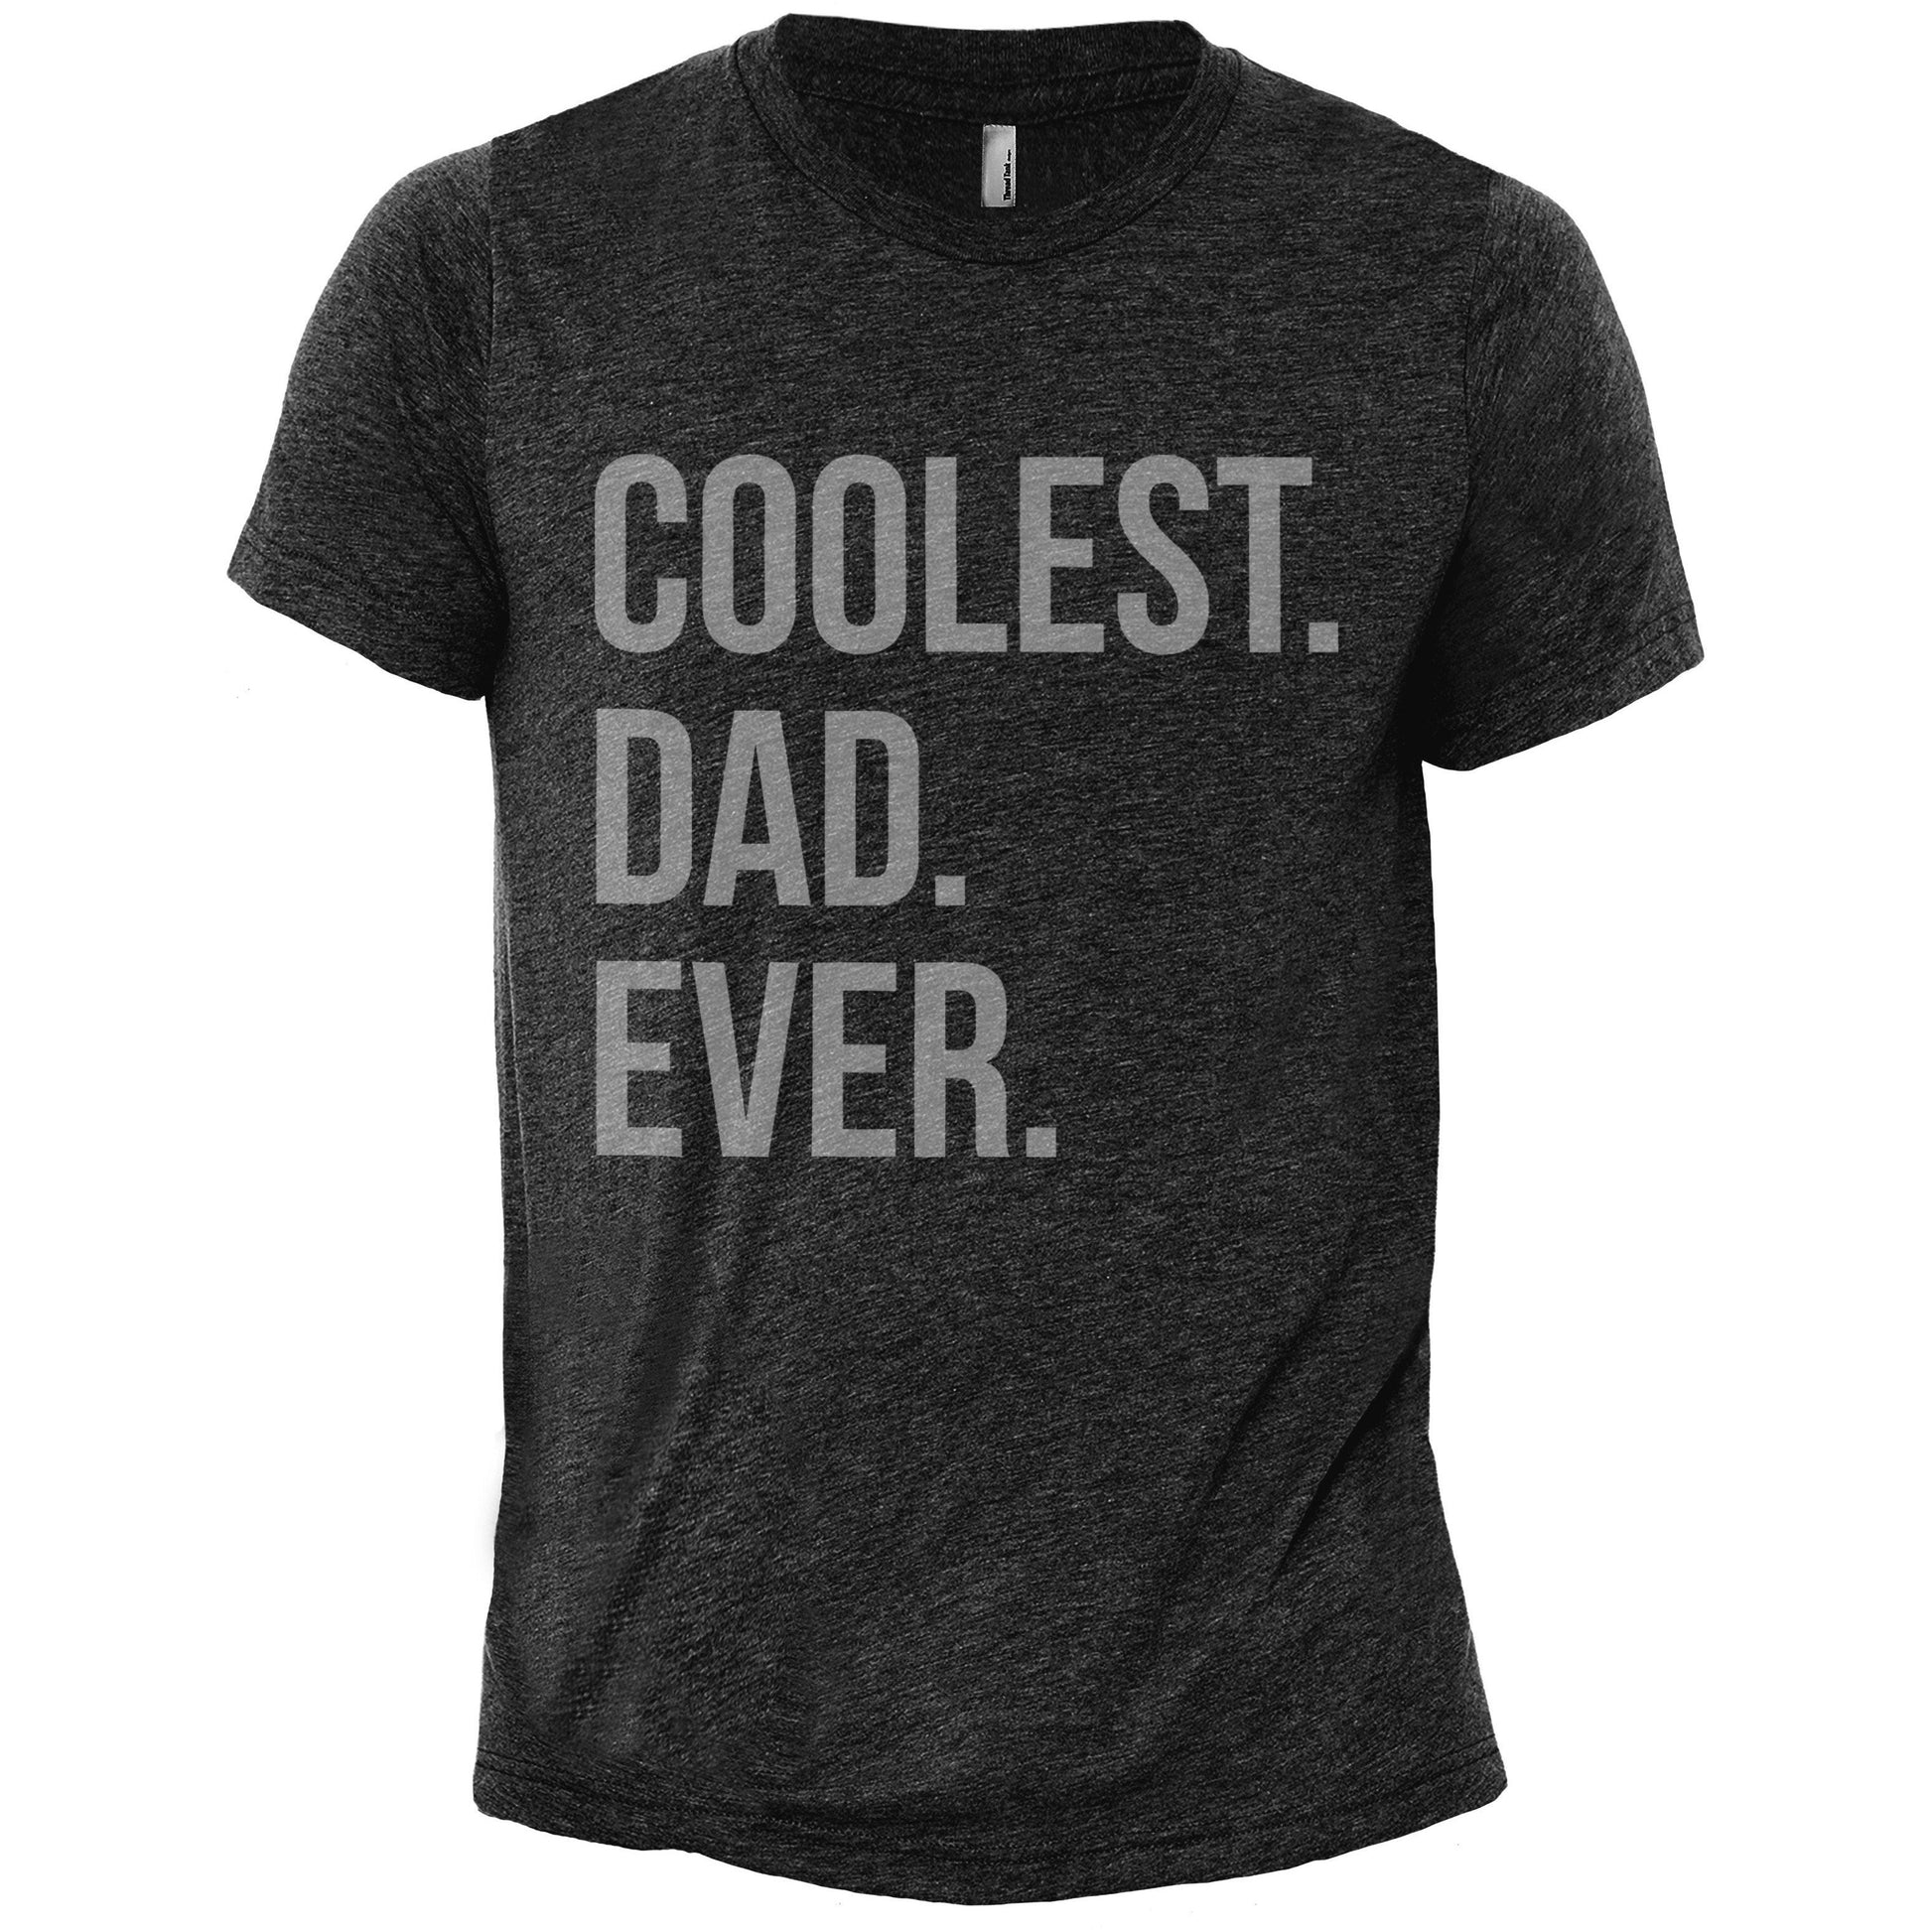 Coolest Dad Ever Charcoal Printed Graphic Men's Crew T-Shirt Tee